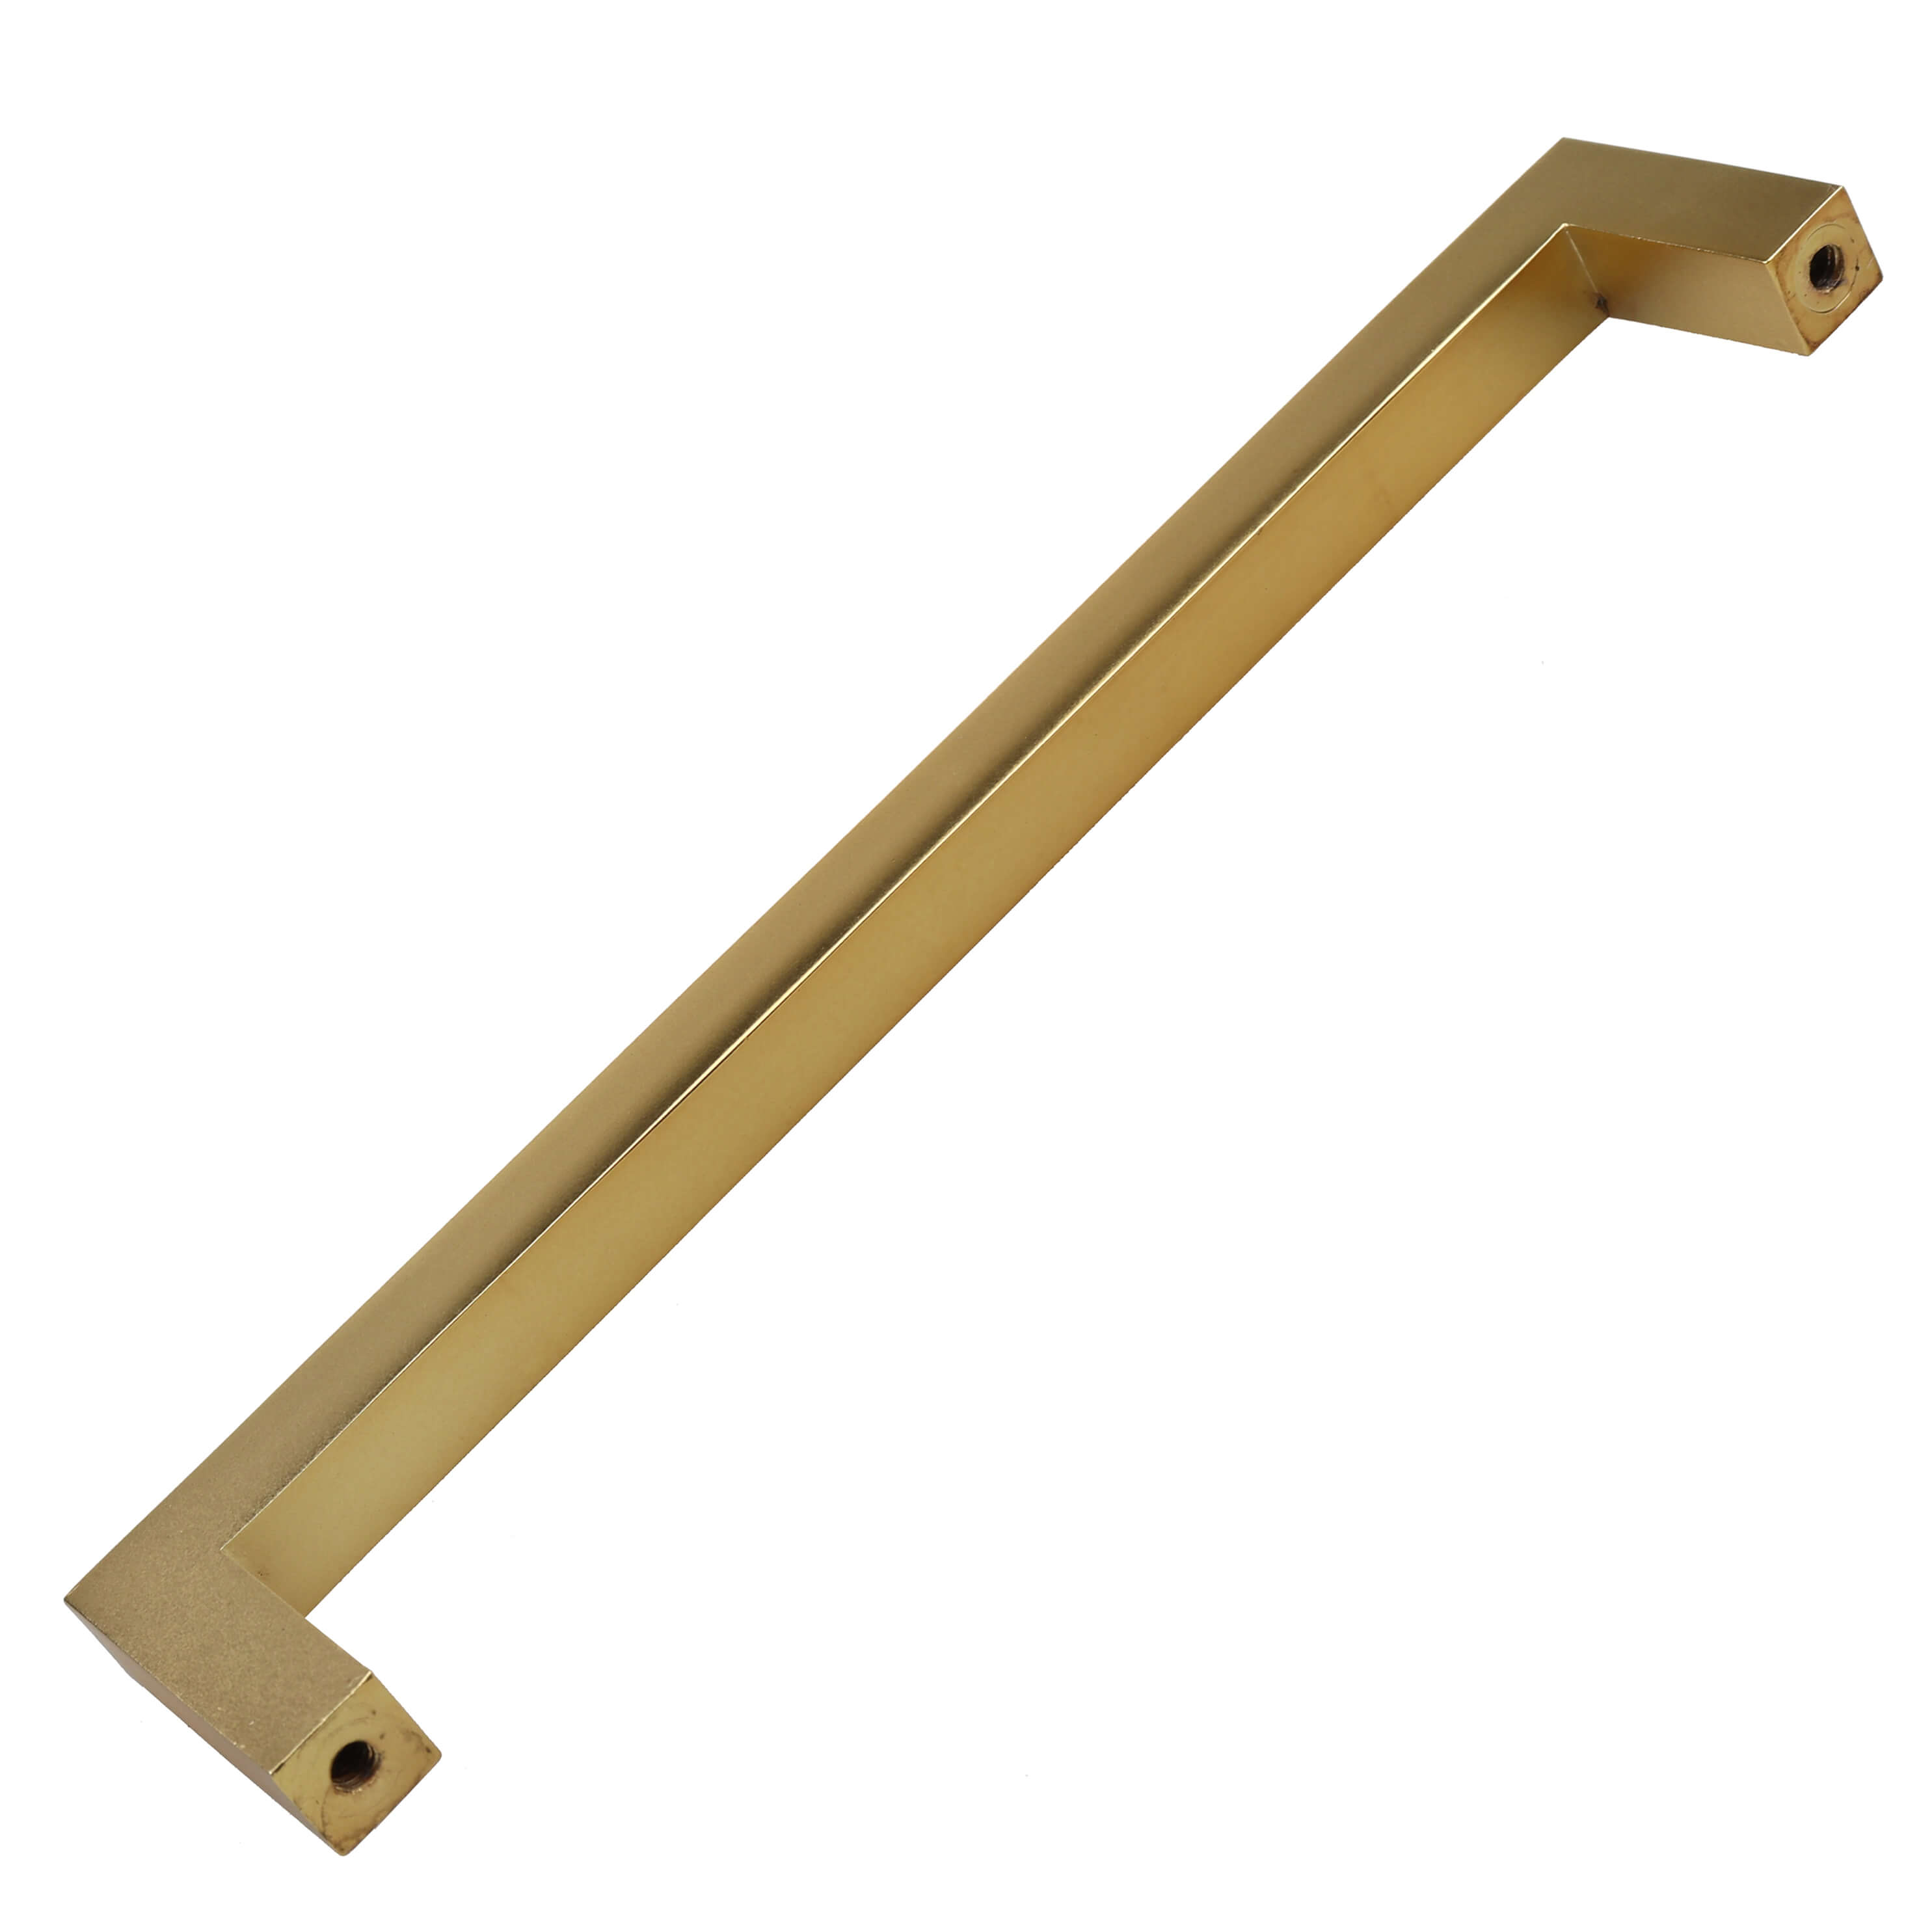 GlideRite 6-1/4 in. Center Solid Square Bar Cabinet Pulls, Brass Gold, Pack of 25 - image 2 of 3